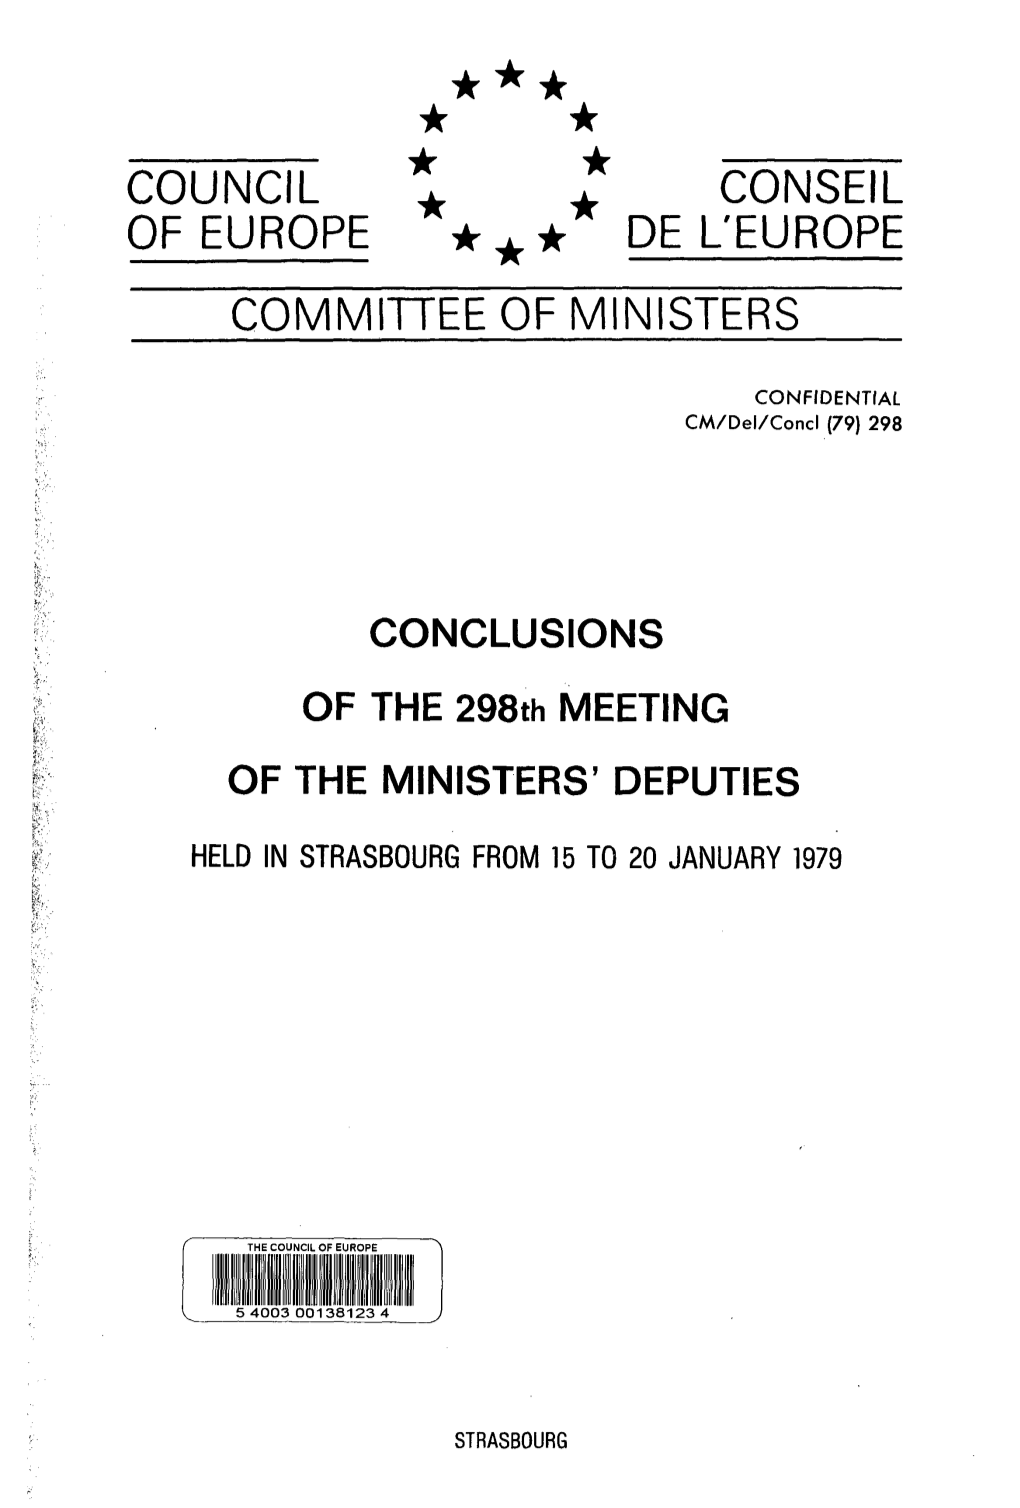 298 CONCLUSIONS of the 298Th MEETING